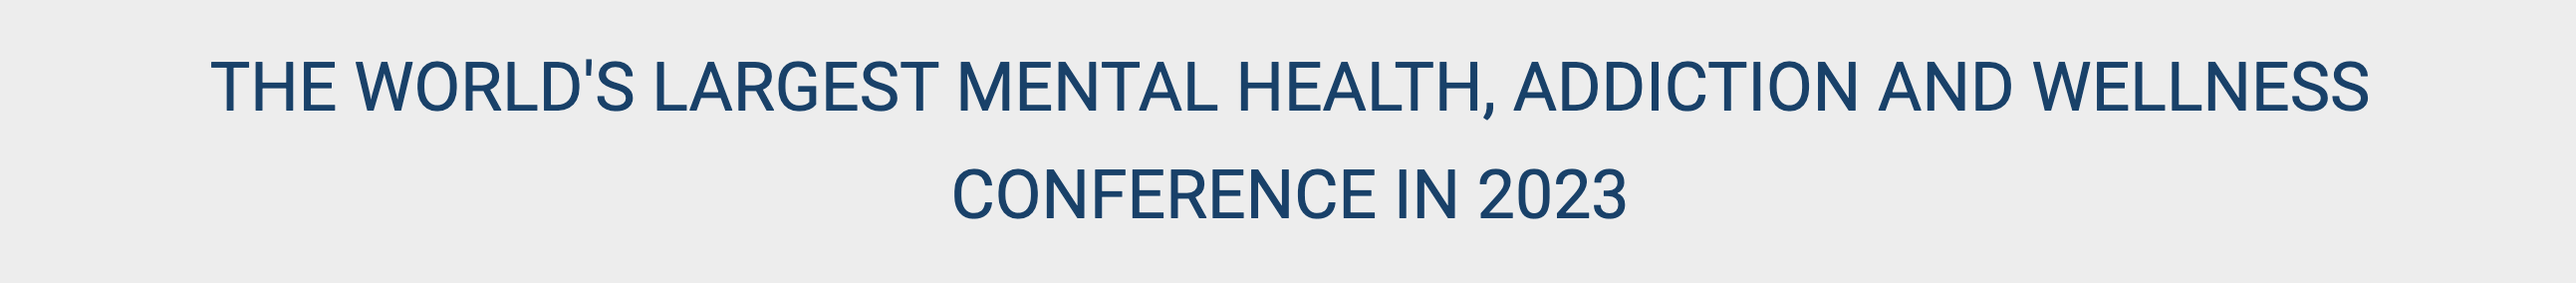 GXC 2023 - The World's Largest Mental Health, addiction Conference